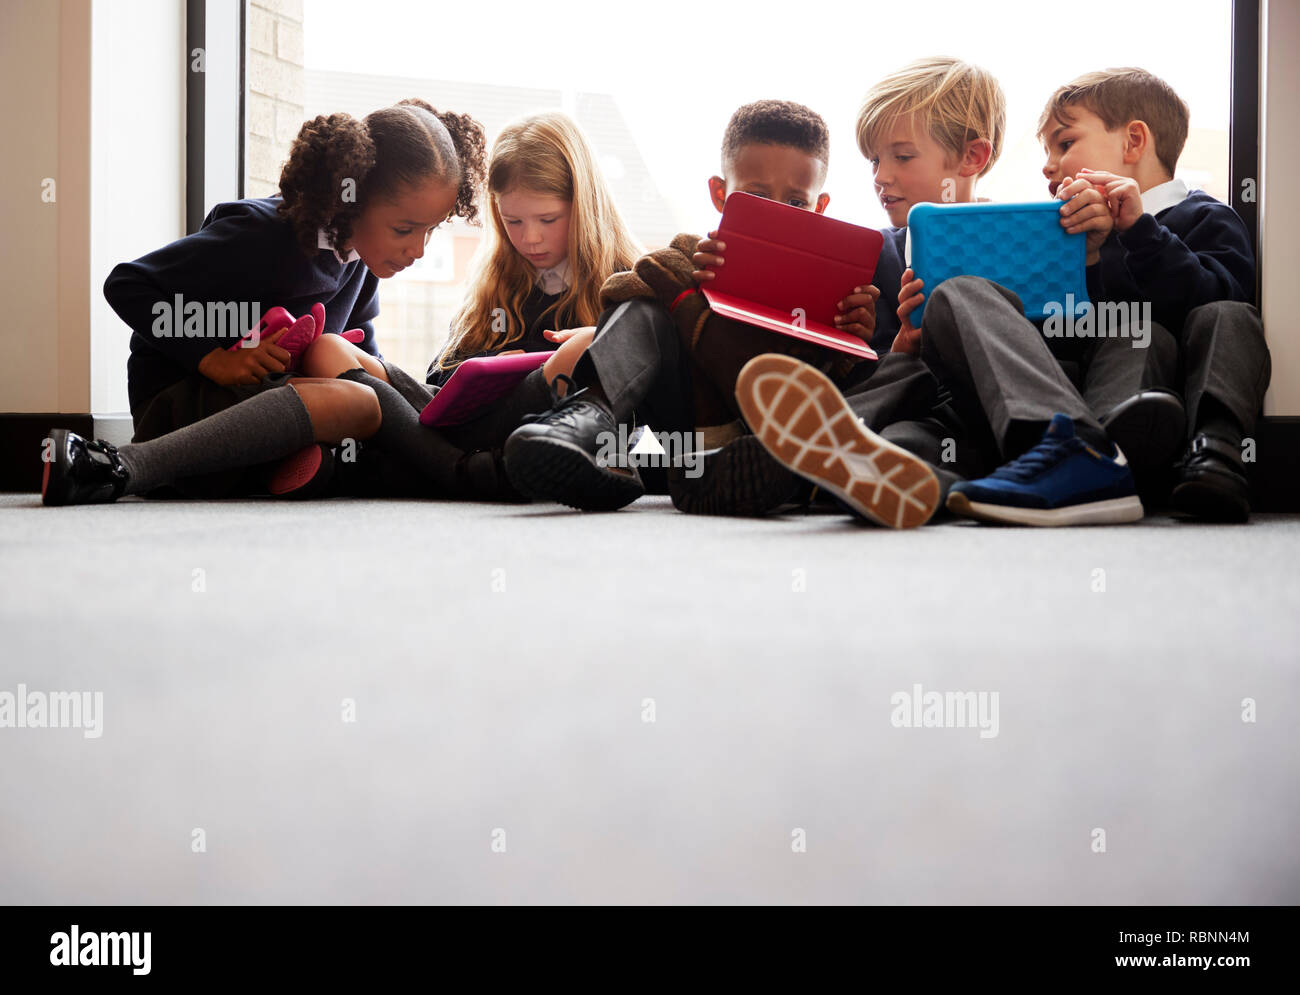 Low angle view of primary school friends sitting together in front of a window in a school corridor looking at tablet computers together Stock Photo